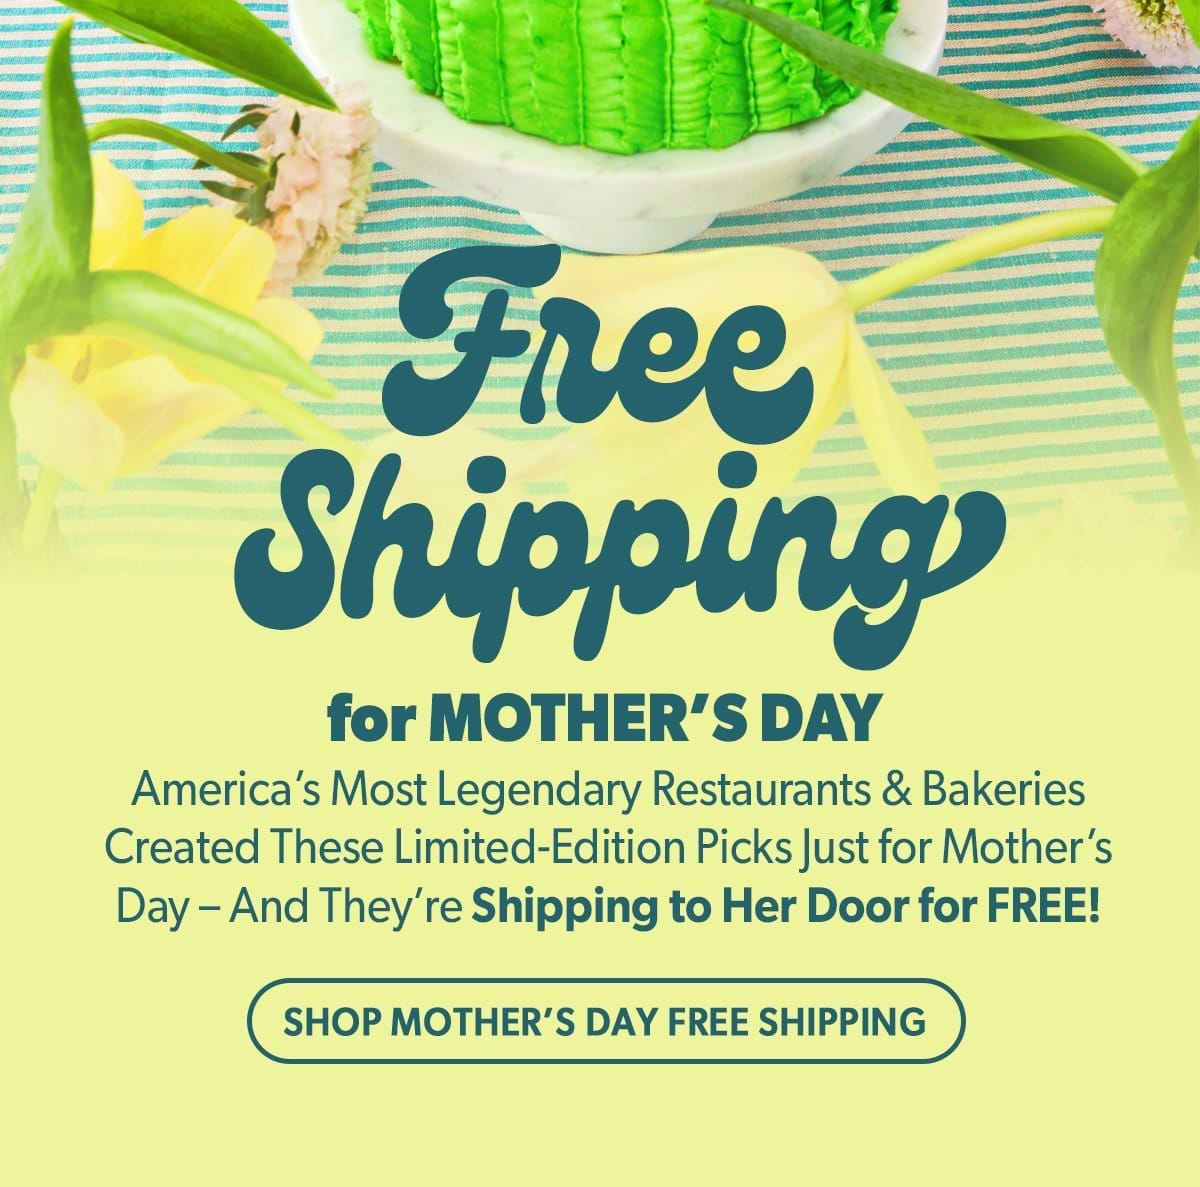 Free Shipping for Mother's Day!